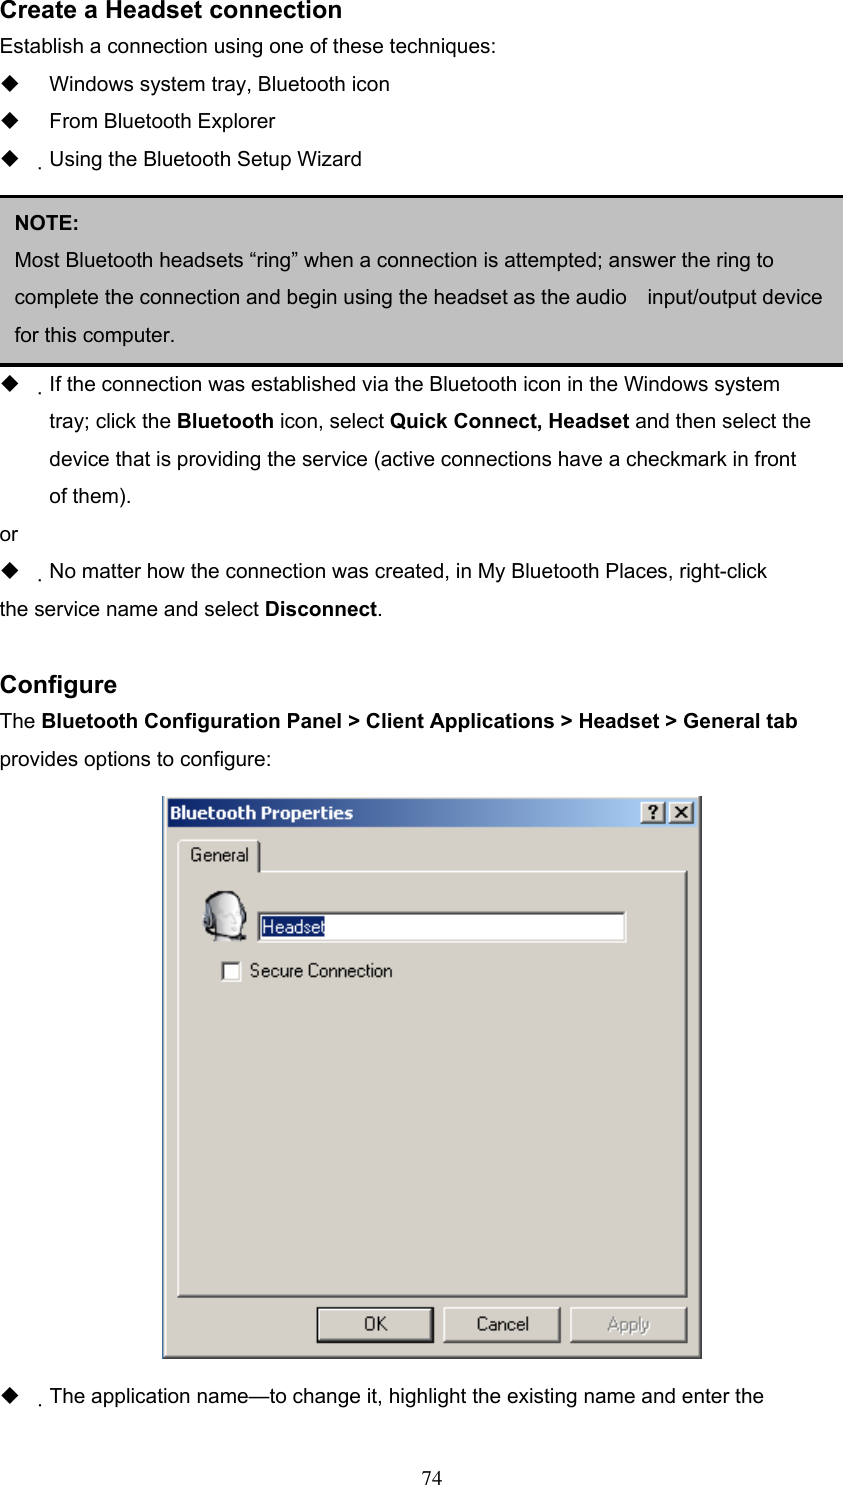 Create a Headset connection Establish a connection using one of these techniques:   Windows system tray, Bluetooth icon   From Bluetooth Explorer   Using the Bluetooth Setup Wizard     Close a Headset connection   If the connection was established via the Bluetooth icon in the Windows system NOTE:  Most Bluetooth headsets “ring” when a connection is attempted; answer the ring to complete the connection and begin using the headset as the audio    input/output device for this computer.   tray; click the Bluetooth icon, select Quick Connect, Headset and then select the device that is providing the service (active connections have a checkmark in front of them). or   No matter how the connection was created, in My Bluetooth Places, right-click the service name and select Disconnect.  Configure The Bluetooth Configuration Panel &gt; Client Applications &gt; Headset &gt; General tab provides options to configure:    The application name—to change it, highlight the existing name and enter the  74 